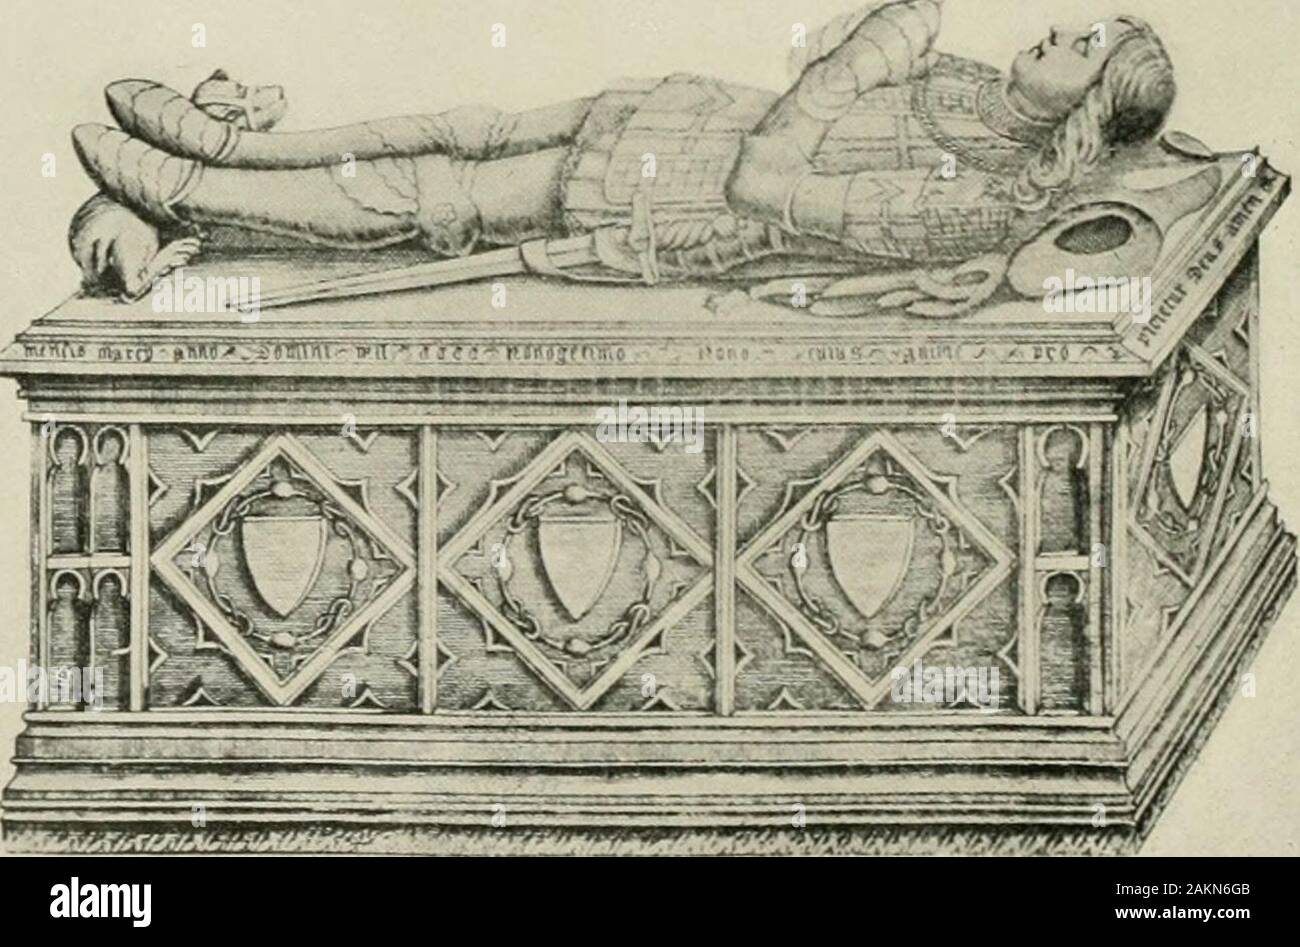 The Greene family and its branches from A.D861 to A.D1904 . TOMB OF SIR RALPH GREENE, SON OF THE BEHEADED LORD GREENE. TOMB OF EDWARD, I:aRL OF WILTSHIRE TOMBS WITH EFFIGIES. LINE OF BEHEADED SIR HENRY GREENElP?iijtigiaiilicd Inj Ilnacli, Eiiijlniid. f.rpivits/y („/? Uiii innh. (min llalxtmiVs GciicahajU. puhlisliol in 1SS5) ^be 6rccne jfanul^ In the ven- first year of King Henry R, Ralphs Sir Henrys oldest son,was restored to his title and estates,* and received in after years particnlarhonors from the king. The beautifnl tomb of this Lord Greene of Draytonis shown on opposite page. As he lef Stock Photo